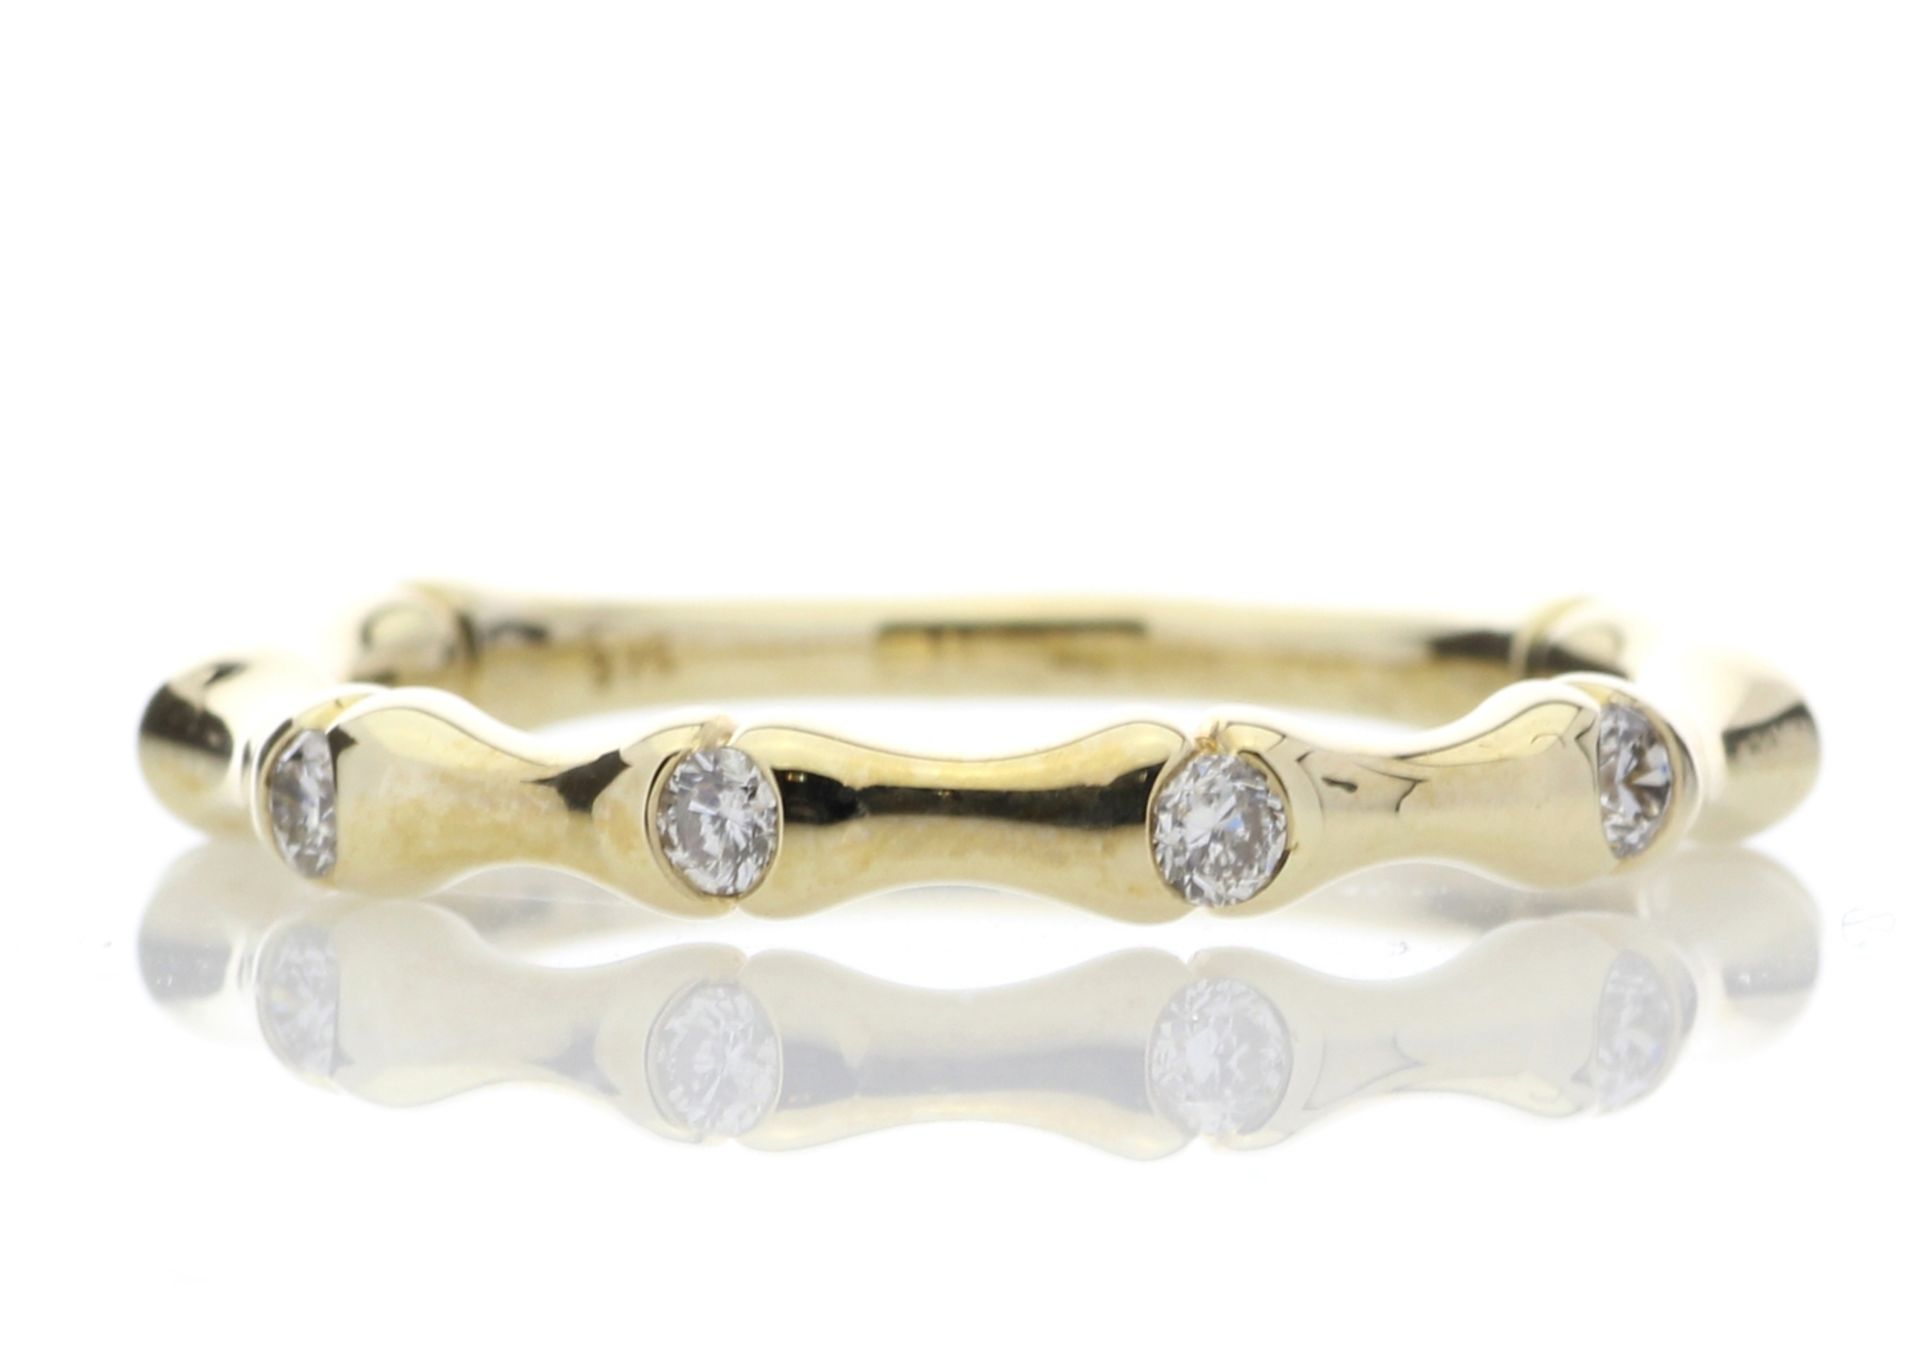 9ct Yellow Gold Diamond Ring 0.12 Carats - Valued by GIE £1,920.00 - 9ct Yellow Gold Diamond Ring